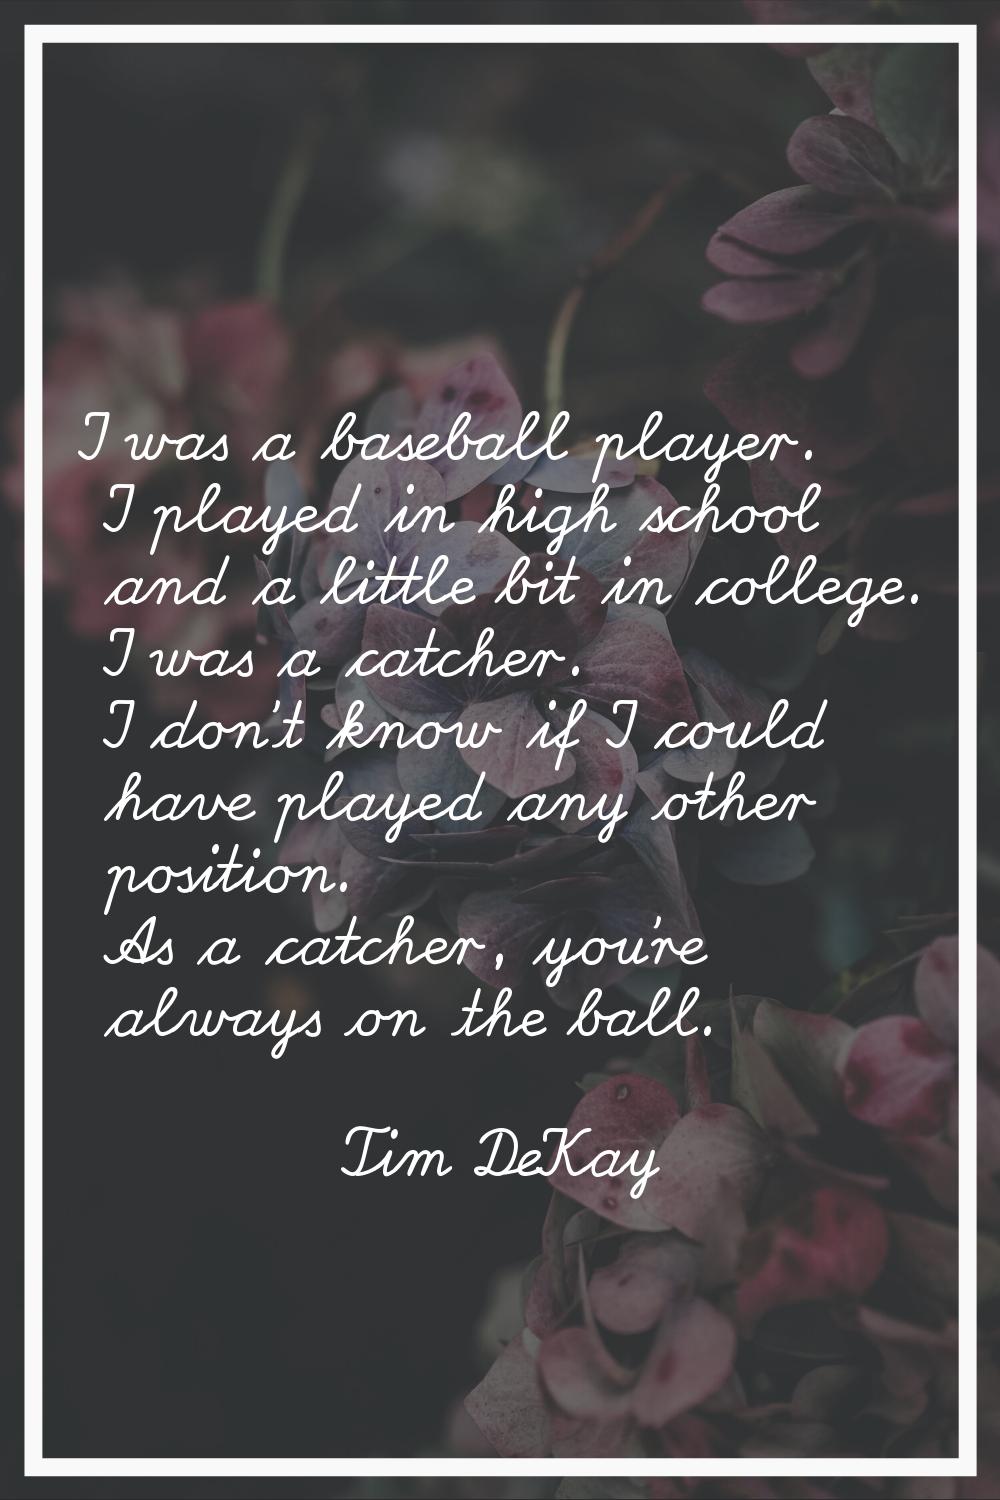 I was a baseball player. I played in high school and a little bit in college. I was a catcher. I do